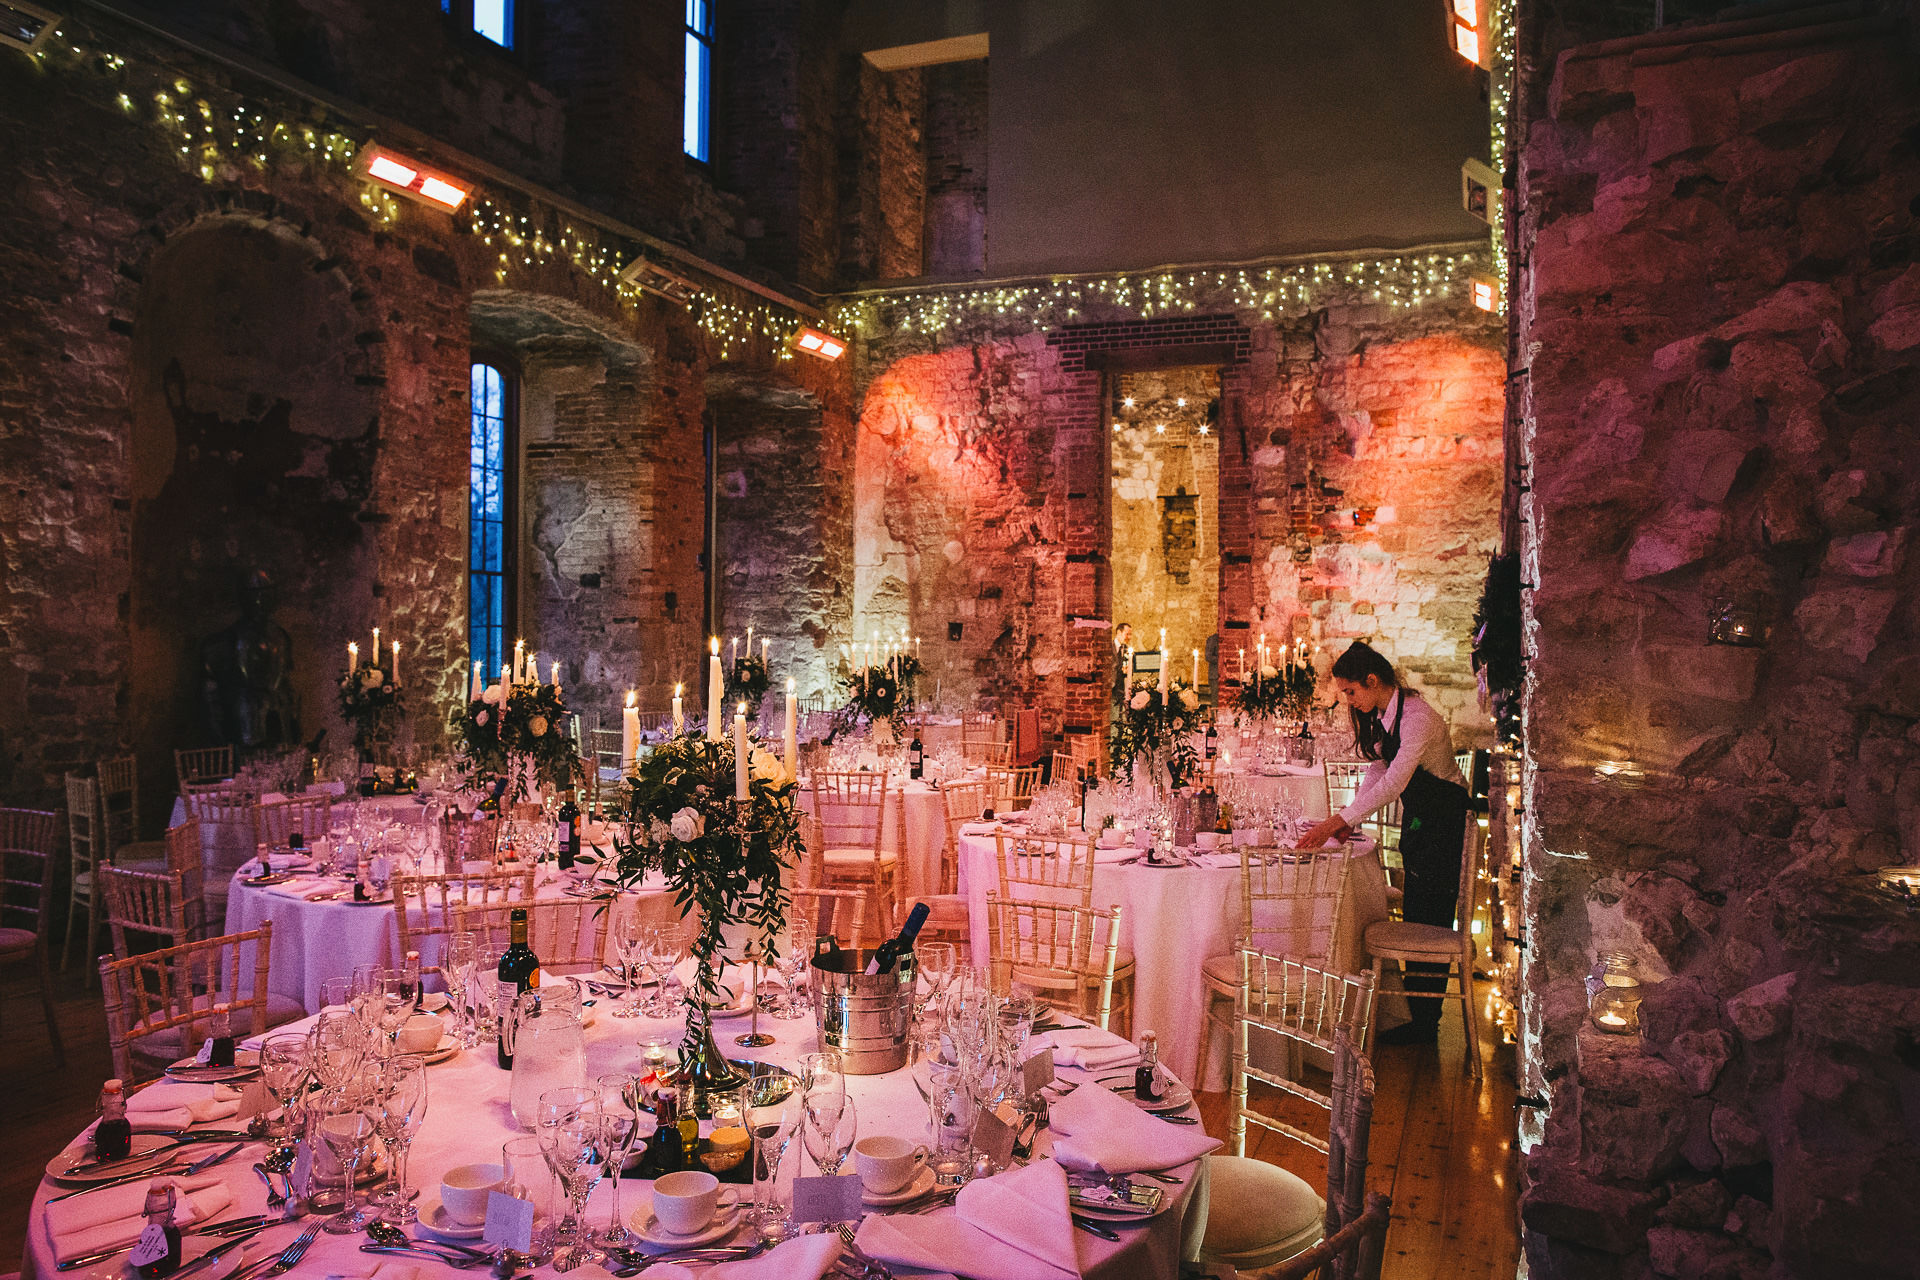 Lulworth Castle decorated for a winter wedding, with candles, fairy lights and pink lighting